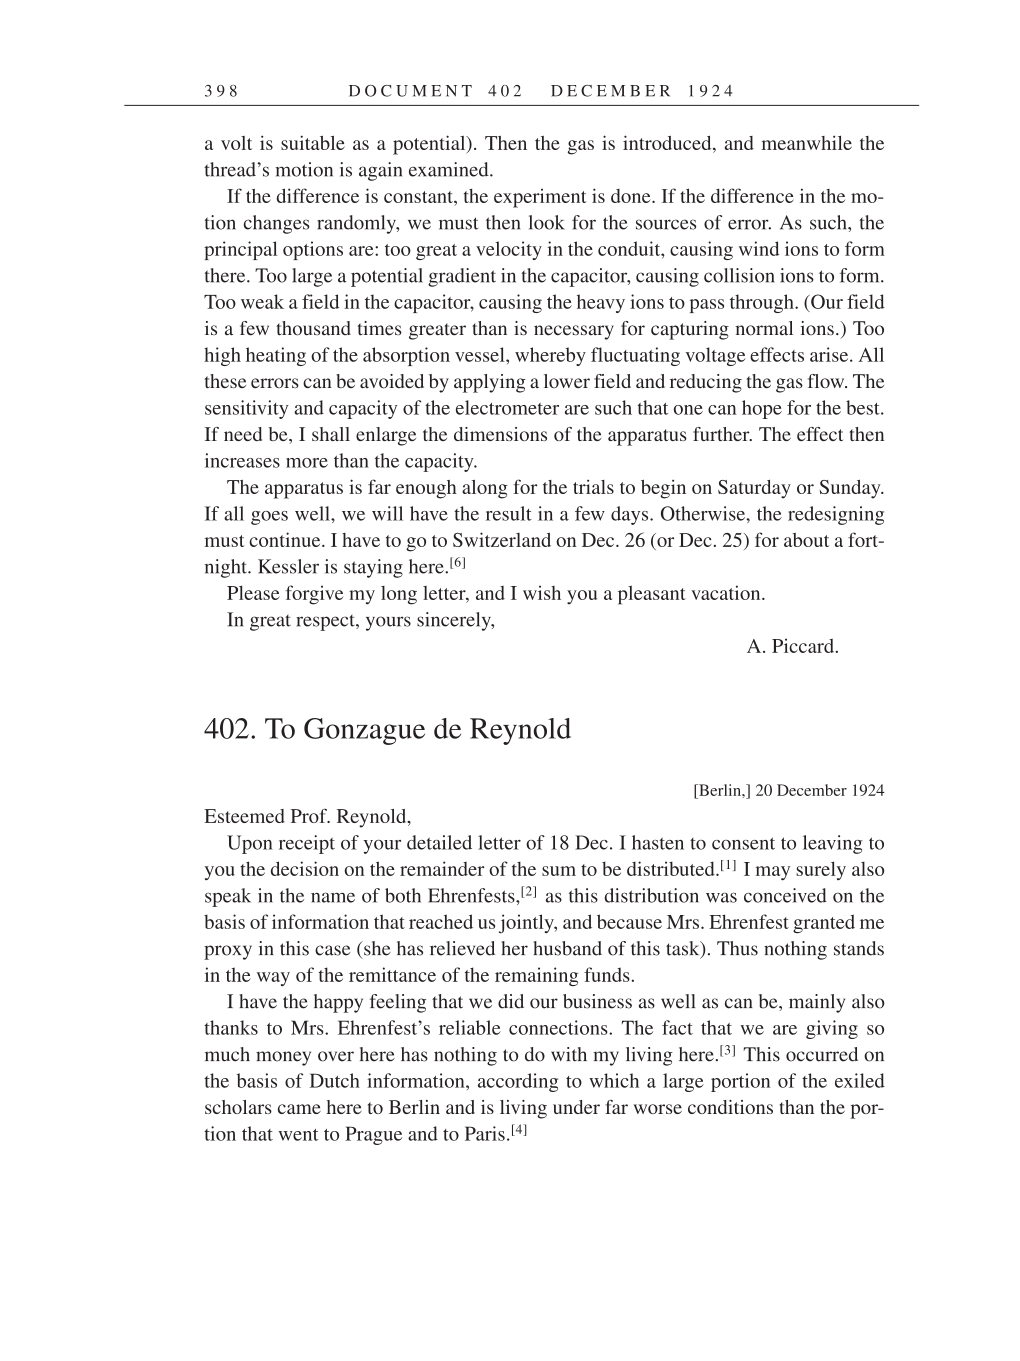 Volume 14: The Berlin Years: Writings & Correspondence, April 1923-May 1925 (English Translation Supplement) page 398